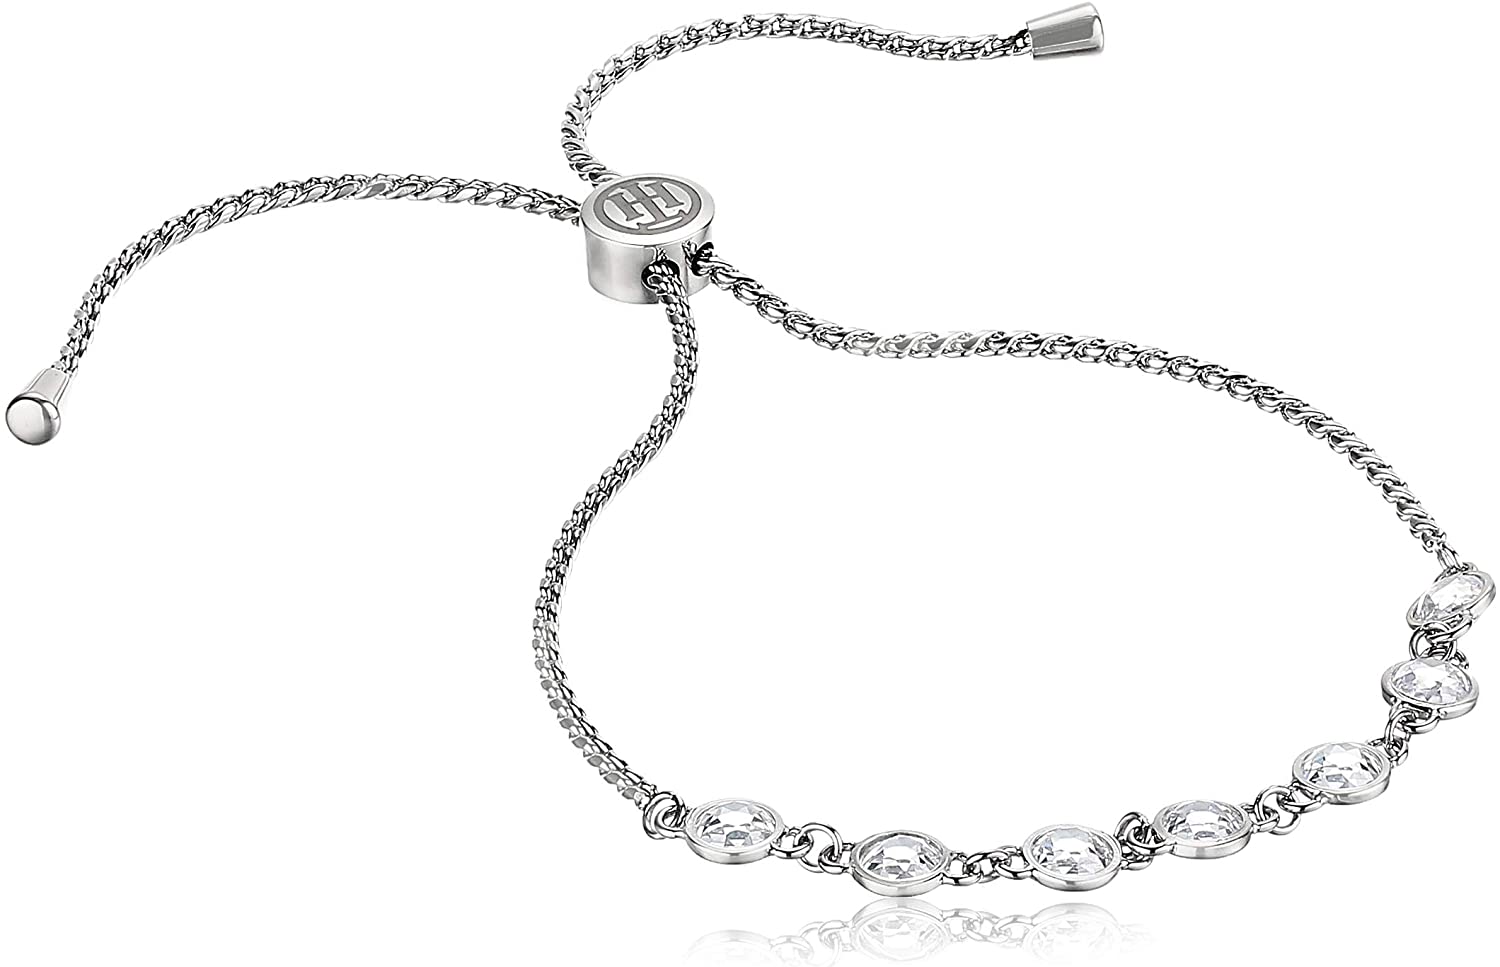 Tommy Hilfiger Women's Jewelry Stainless Steel Bracelet Embellished with Stones, Color: Silver